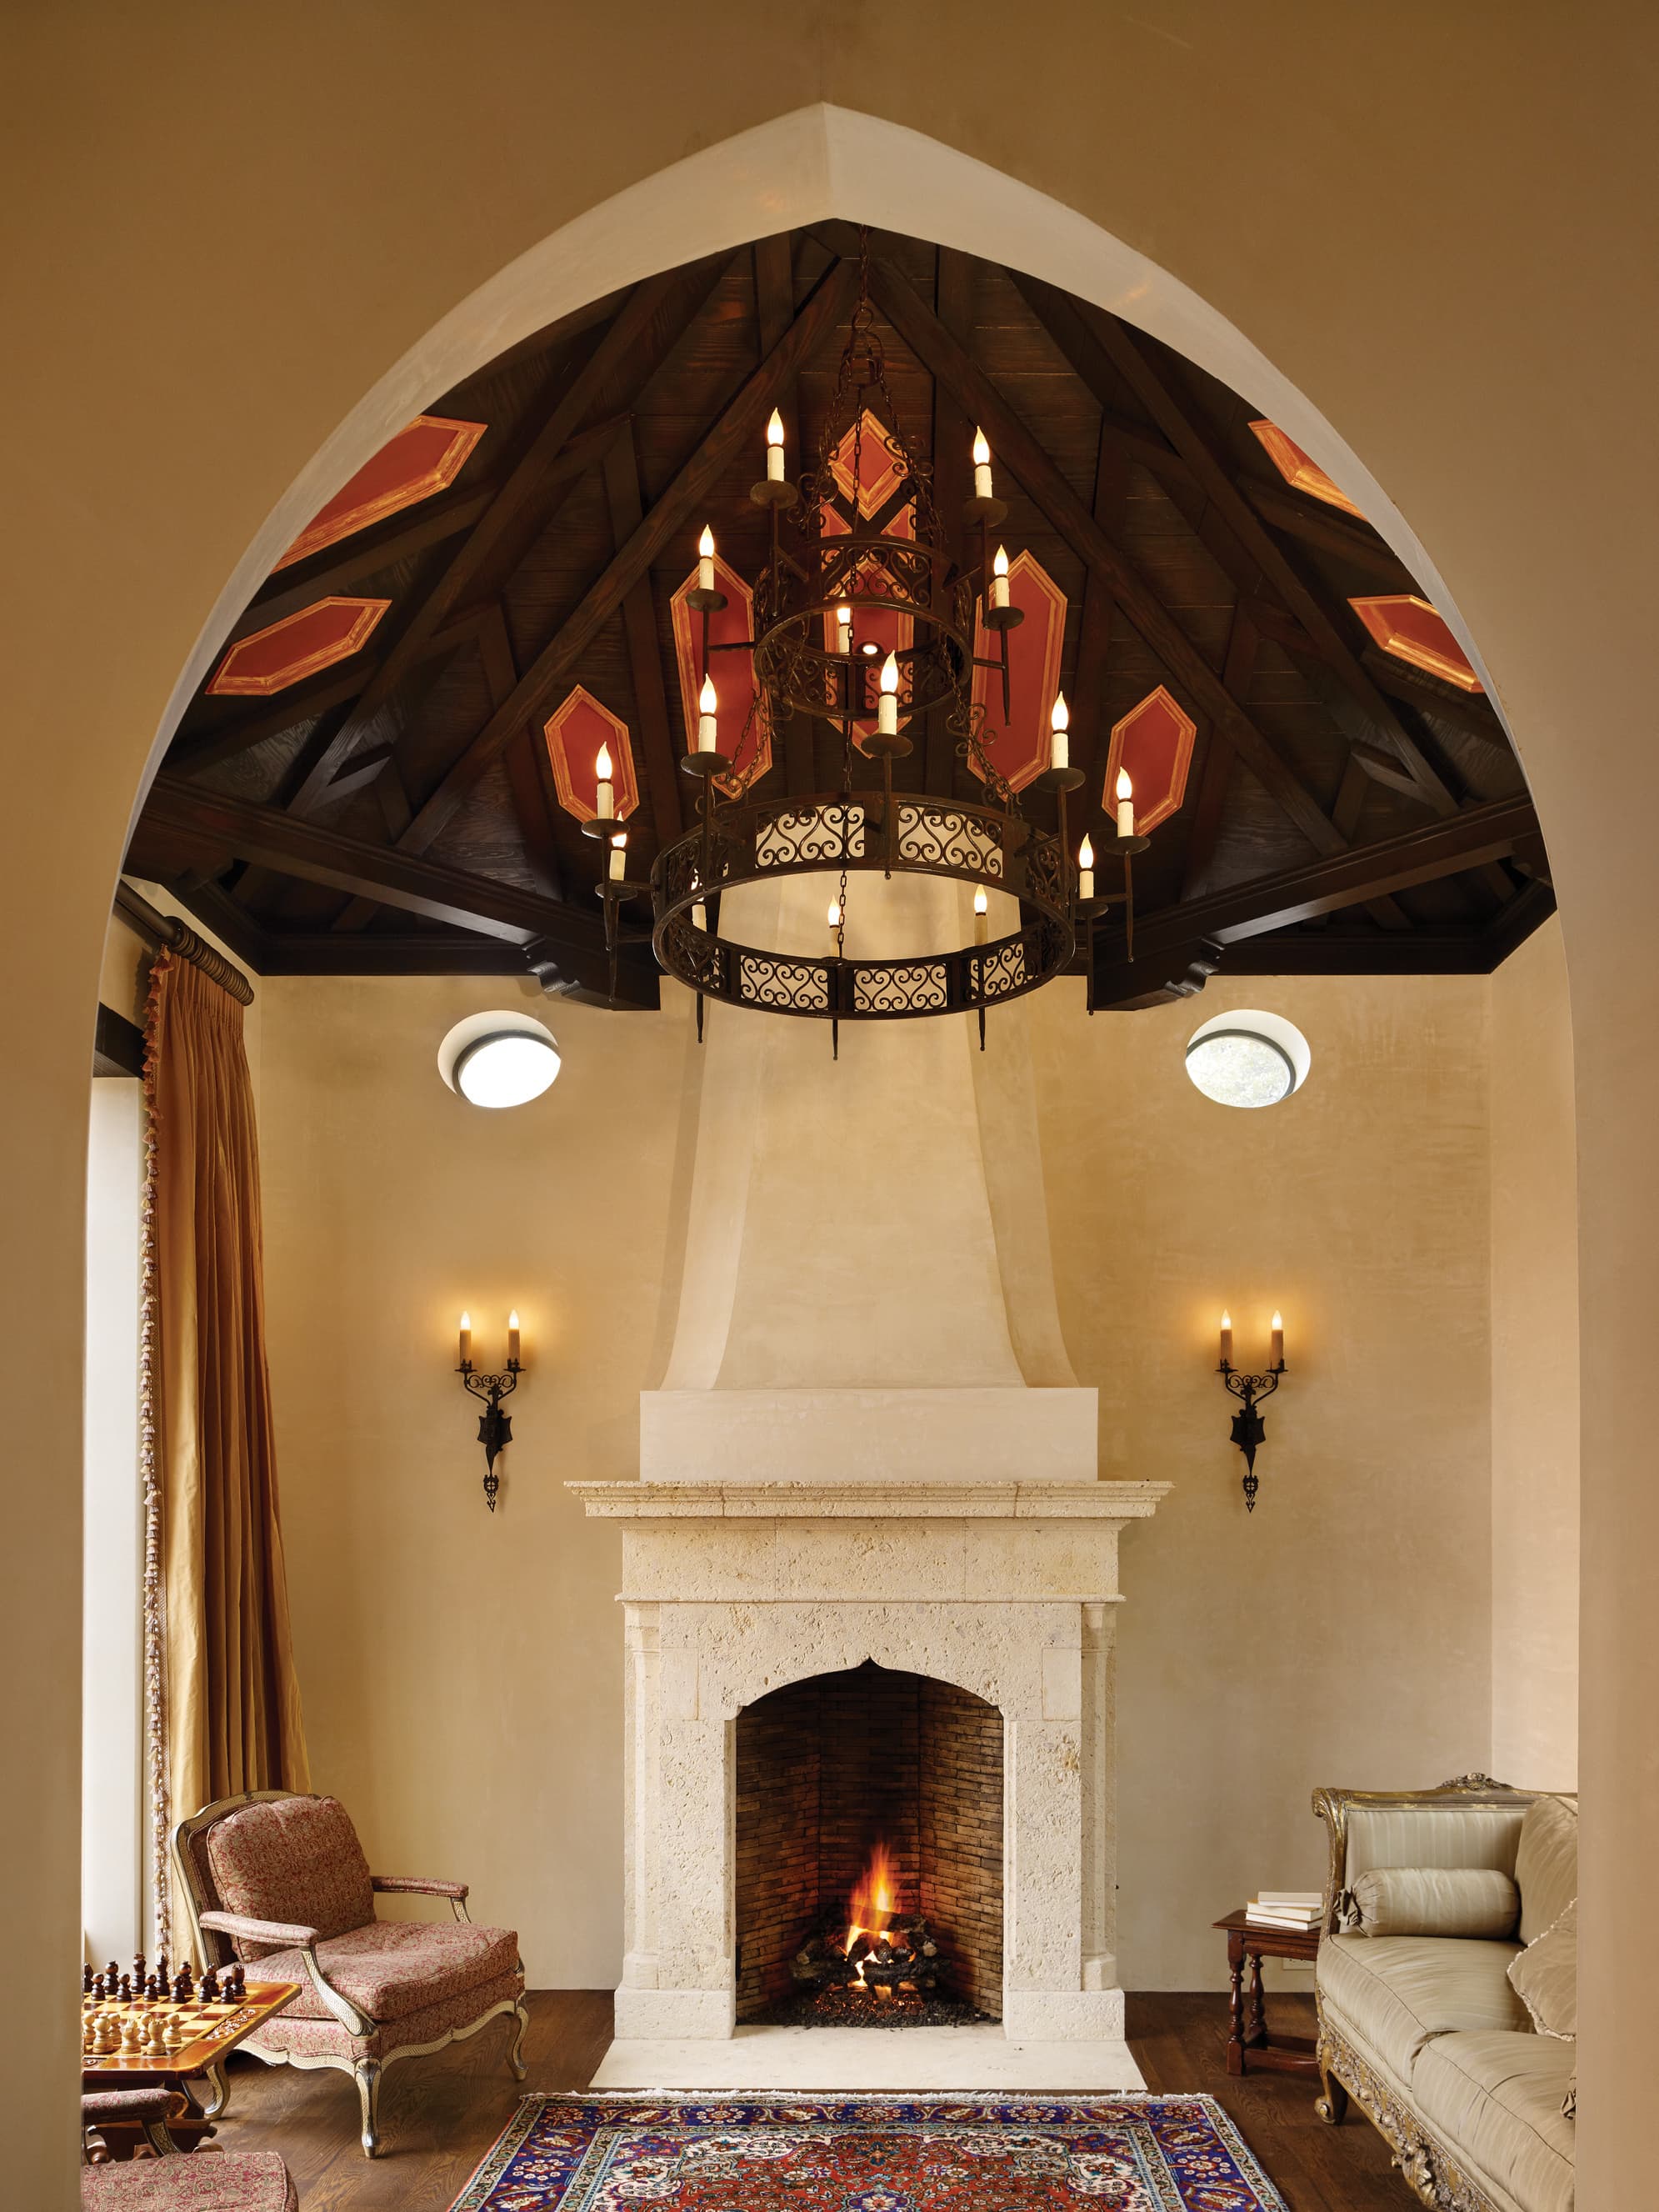 Sitting area with iron chandelier and fireplace